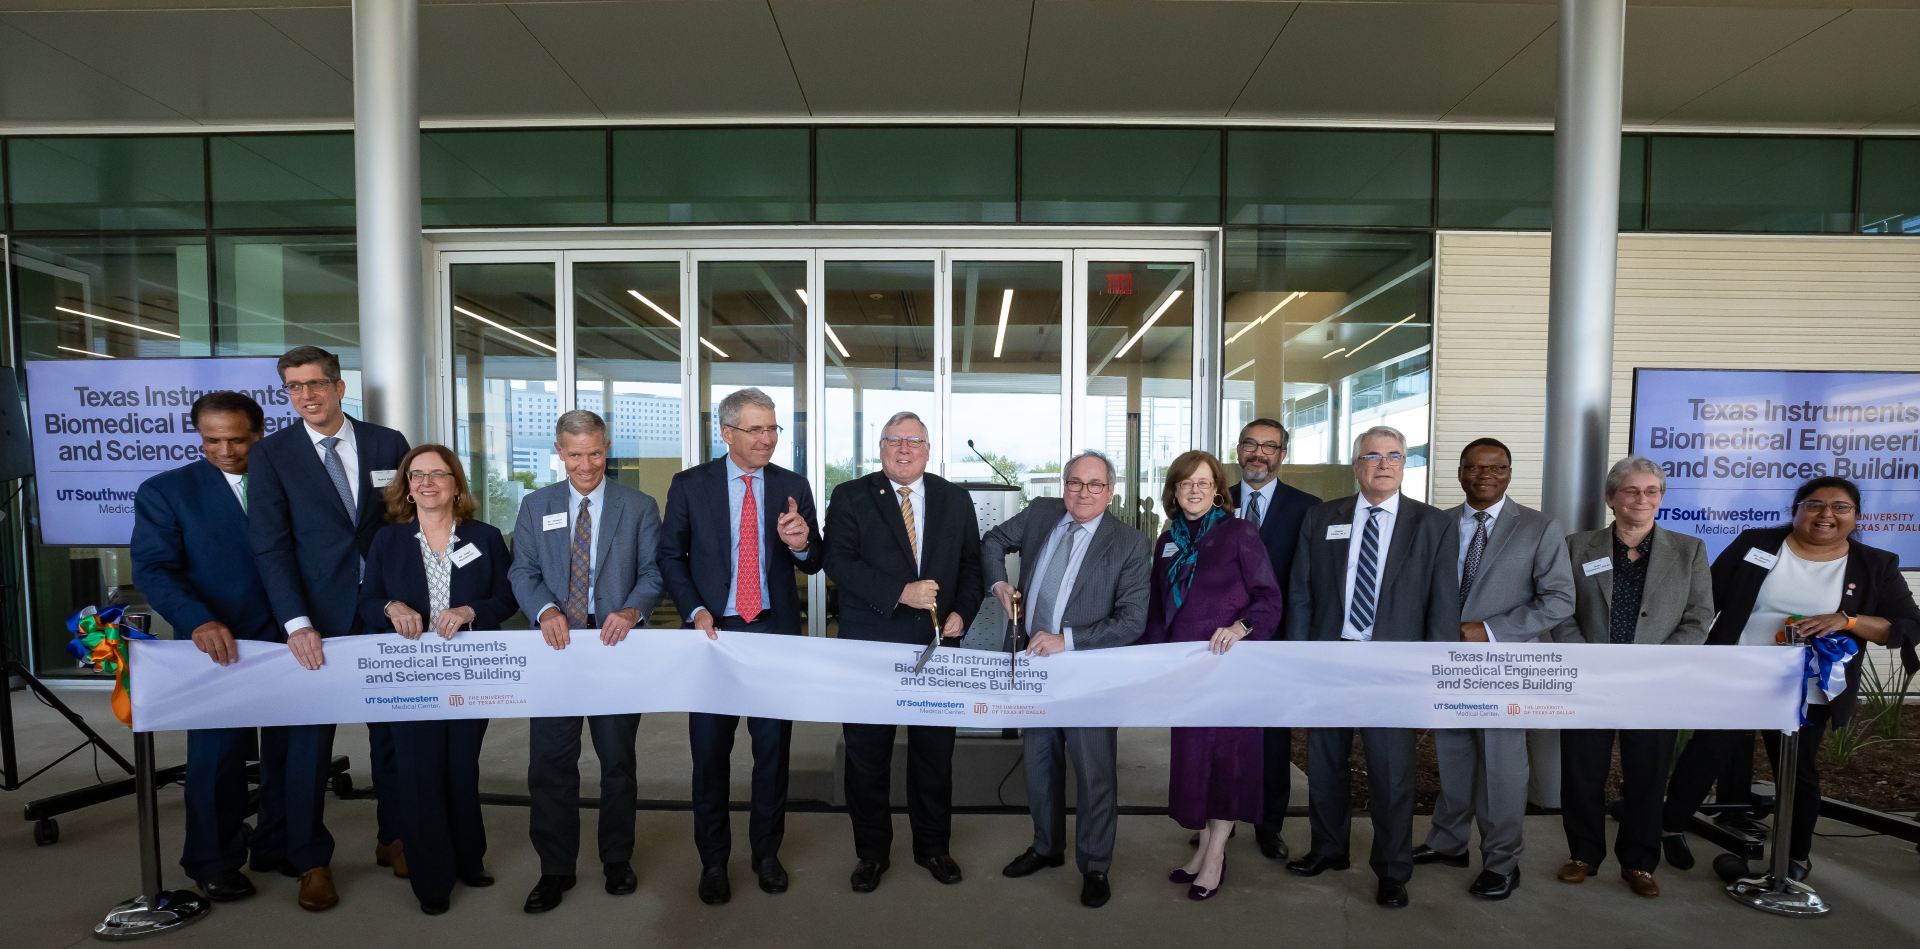 Representatives of UT Dallas and UT Southwestern cut the ribbon opening the Texas Instruments Biomedical Engineering and Sciences Building.